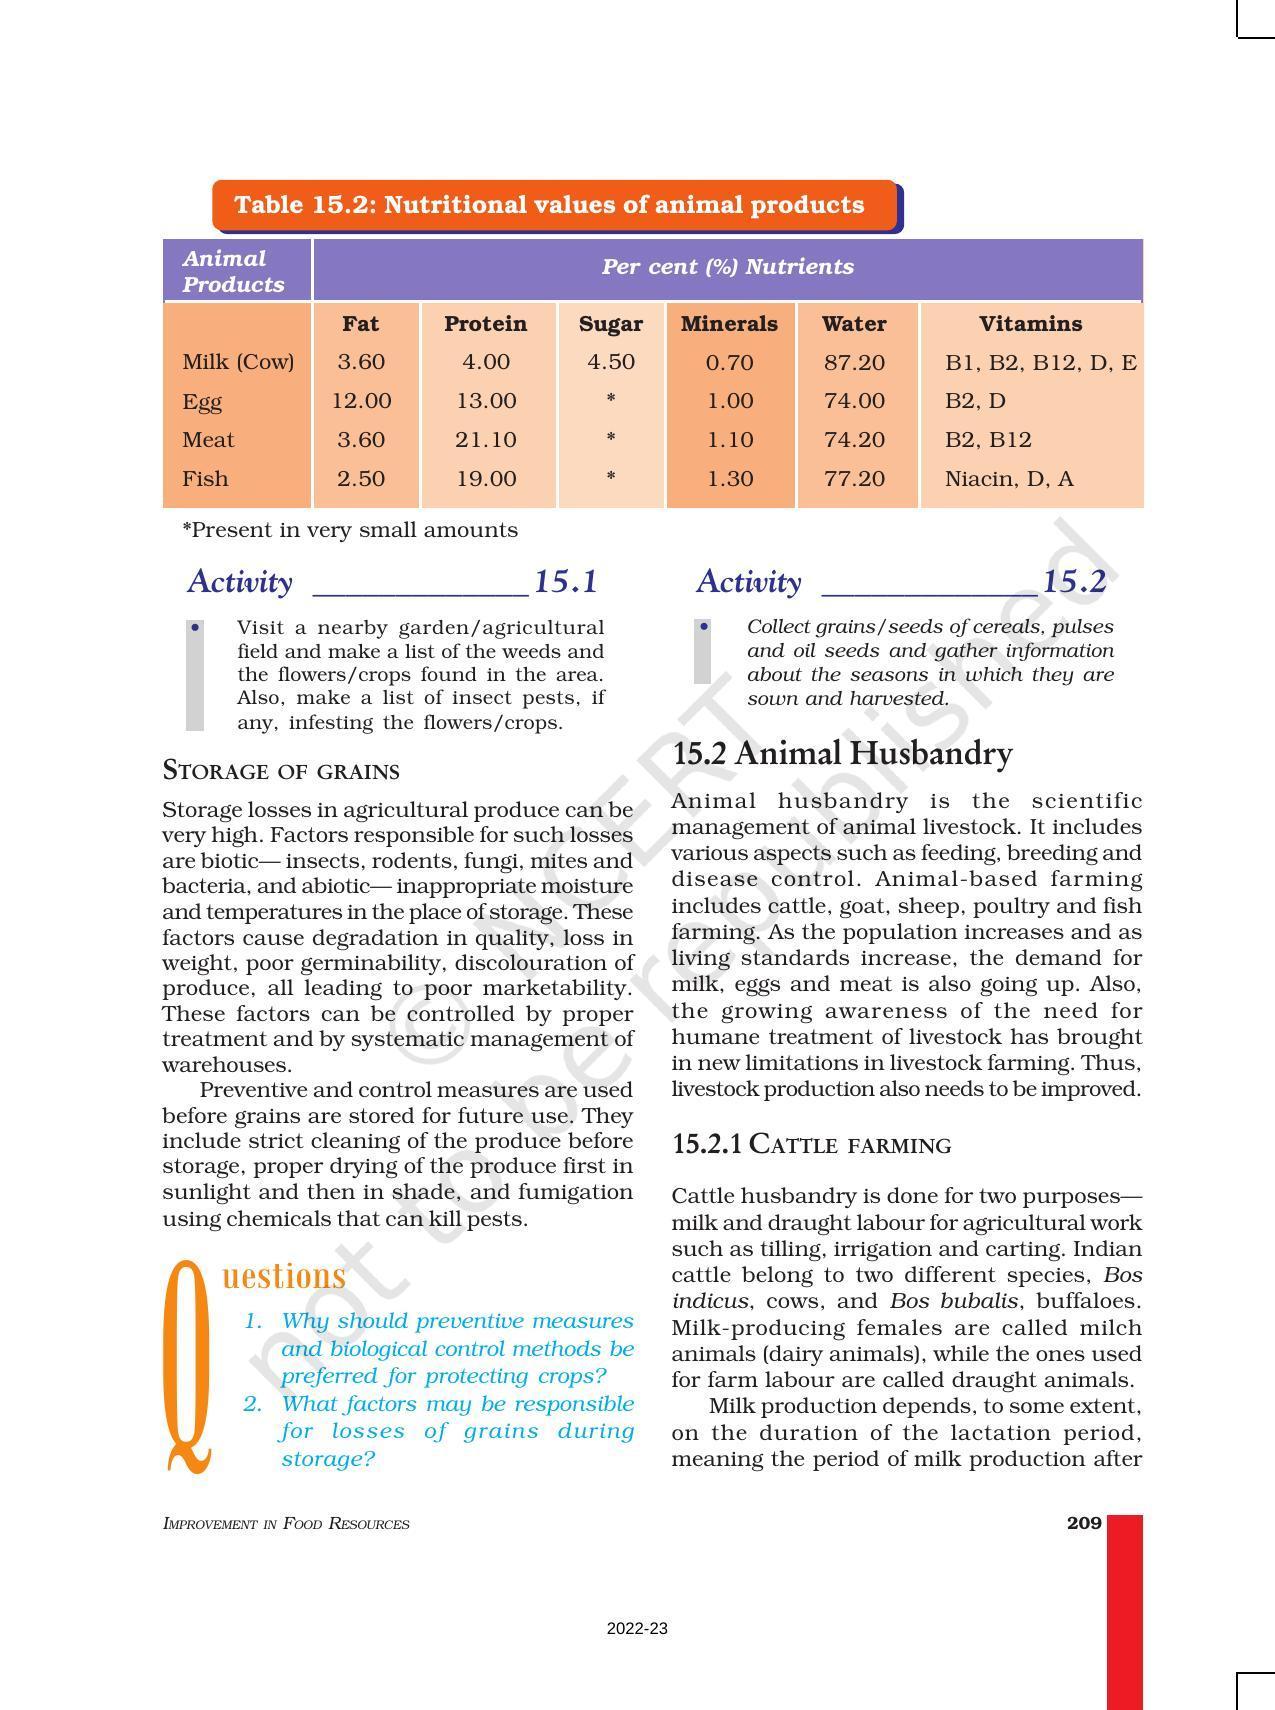 NCERT Book for Class 9 Science Chapter 15 Improvement in Food Resources - Page 7